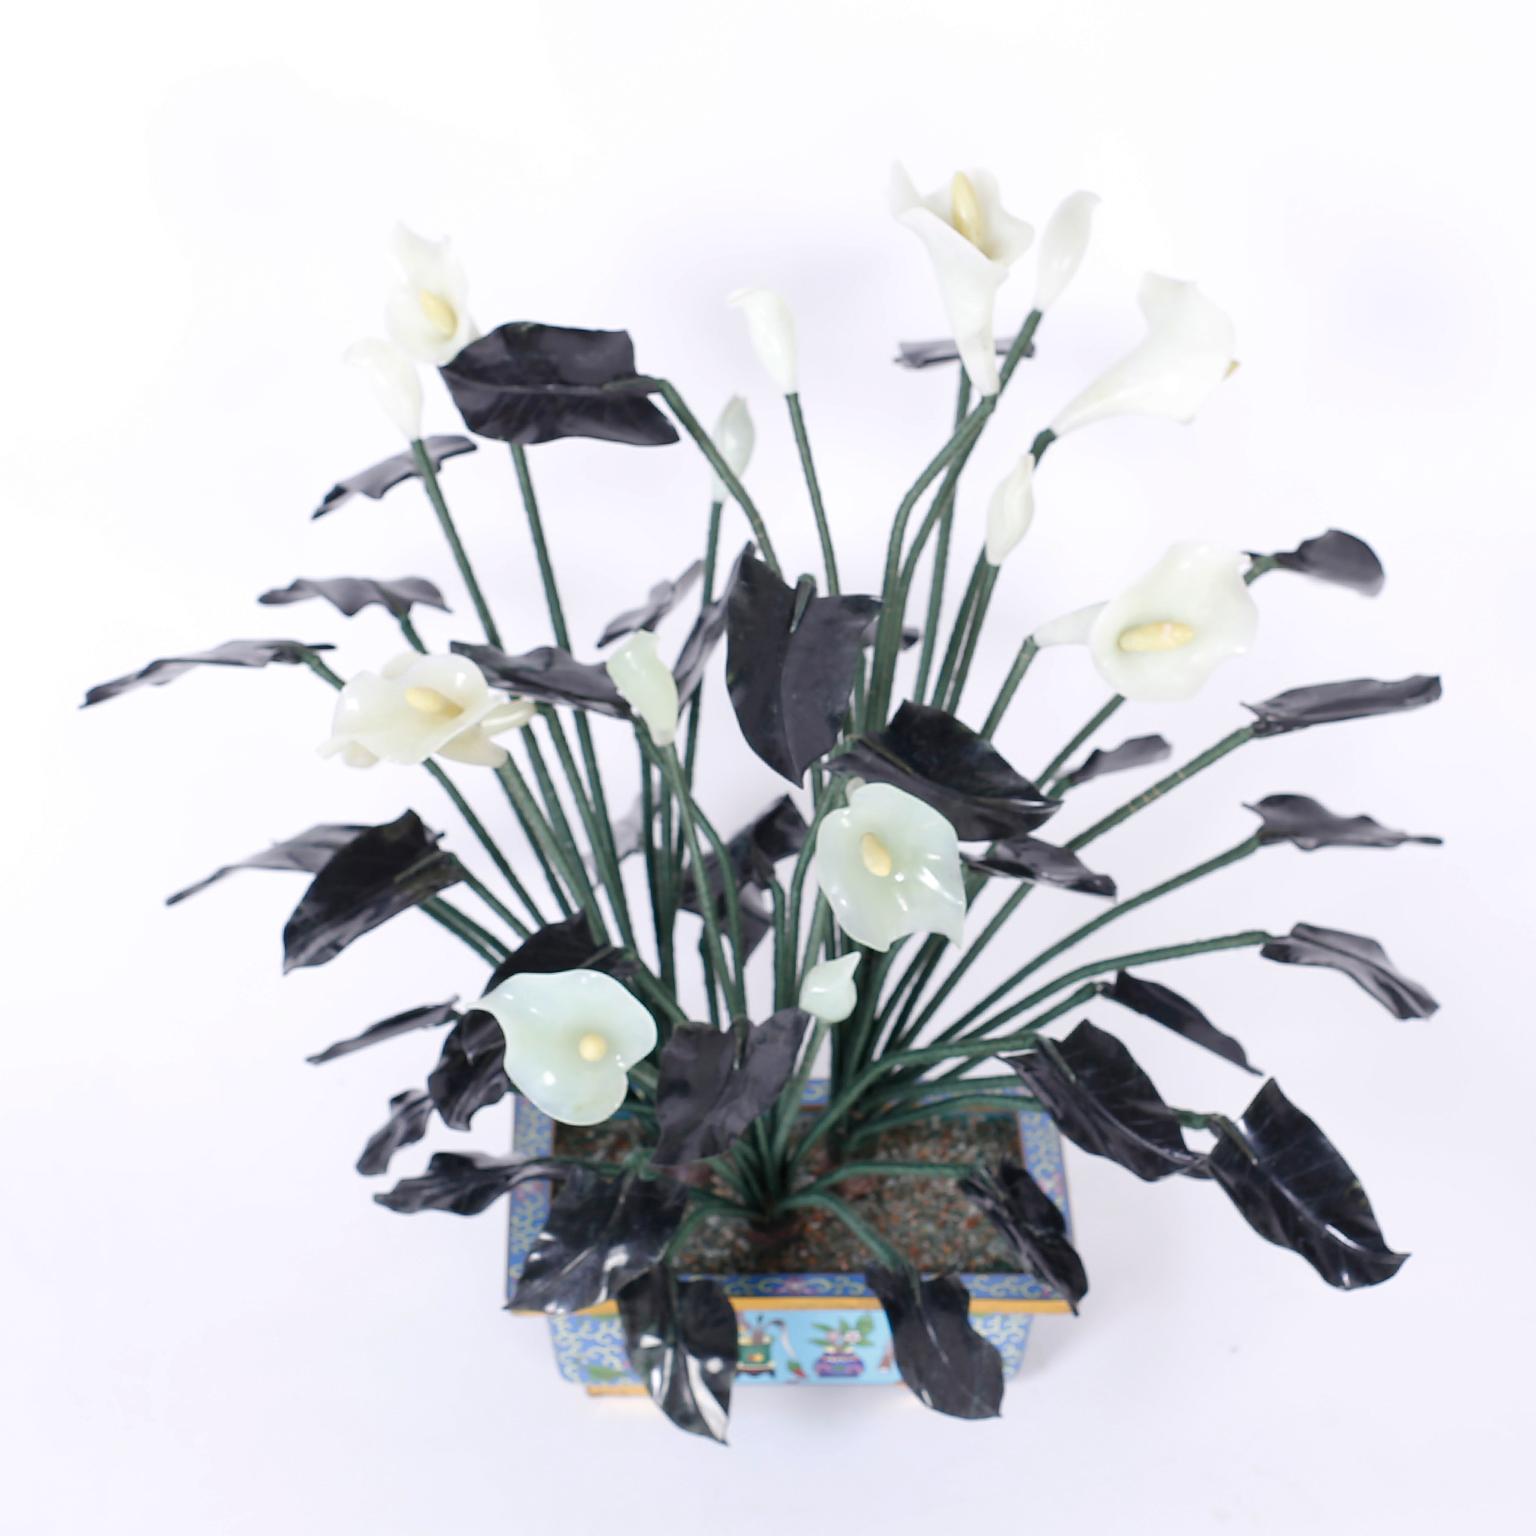 Chinese lily plants with white jade flowers, spinach jade leaves, silk wrapped metal stems and arranged in a cloisonné planter.